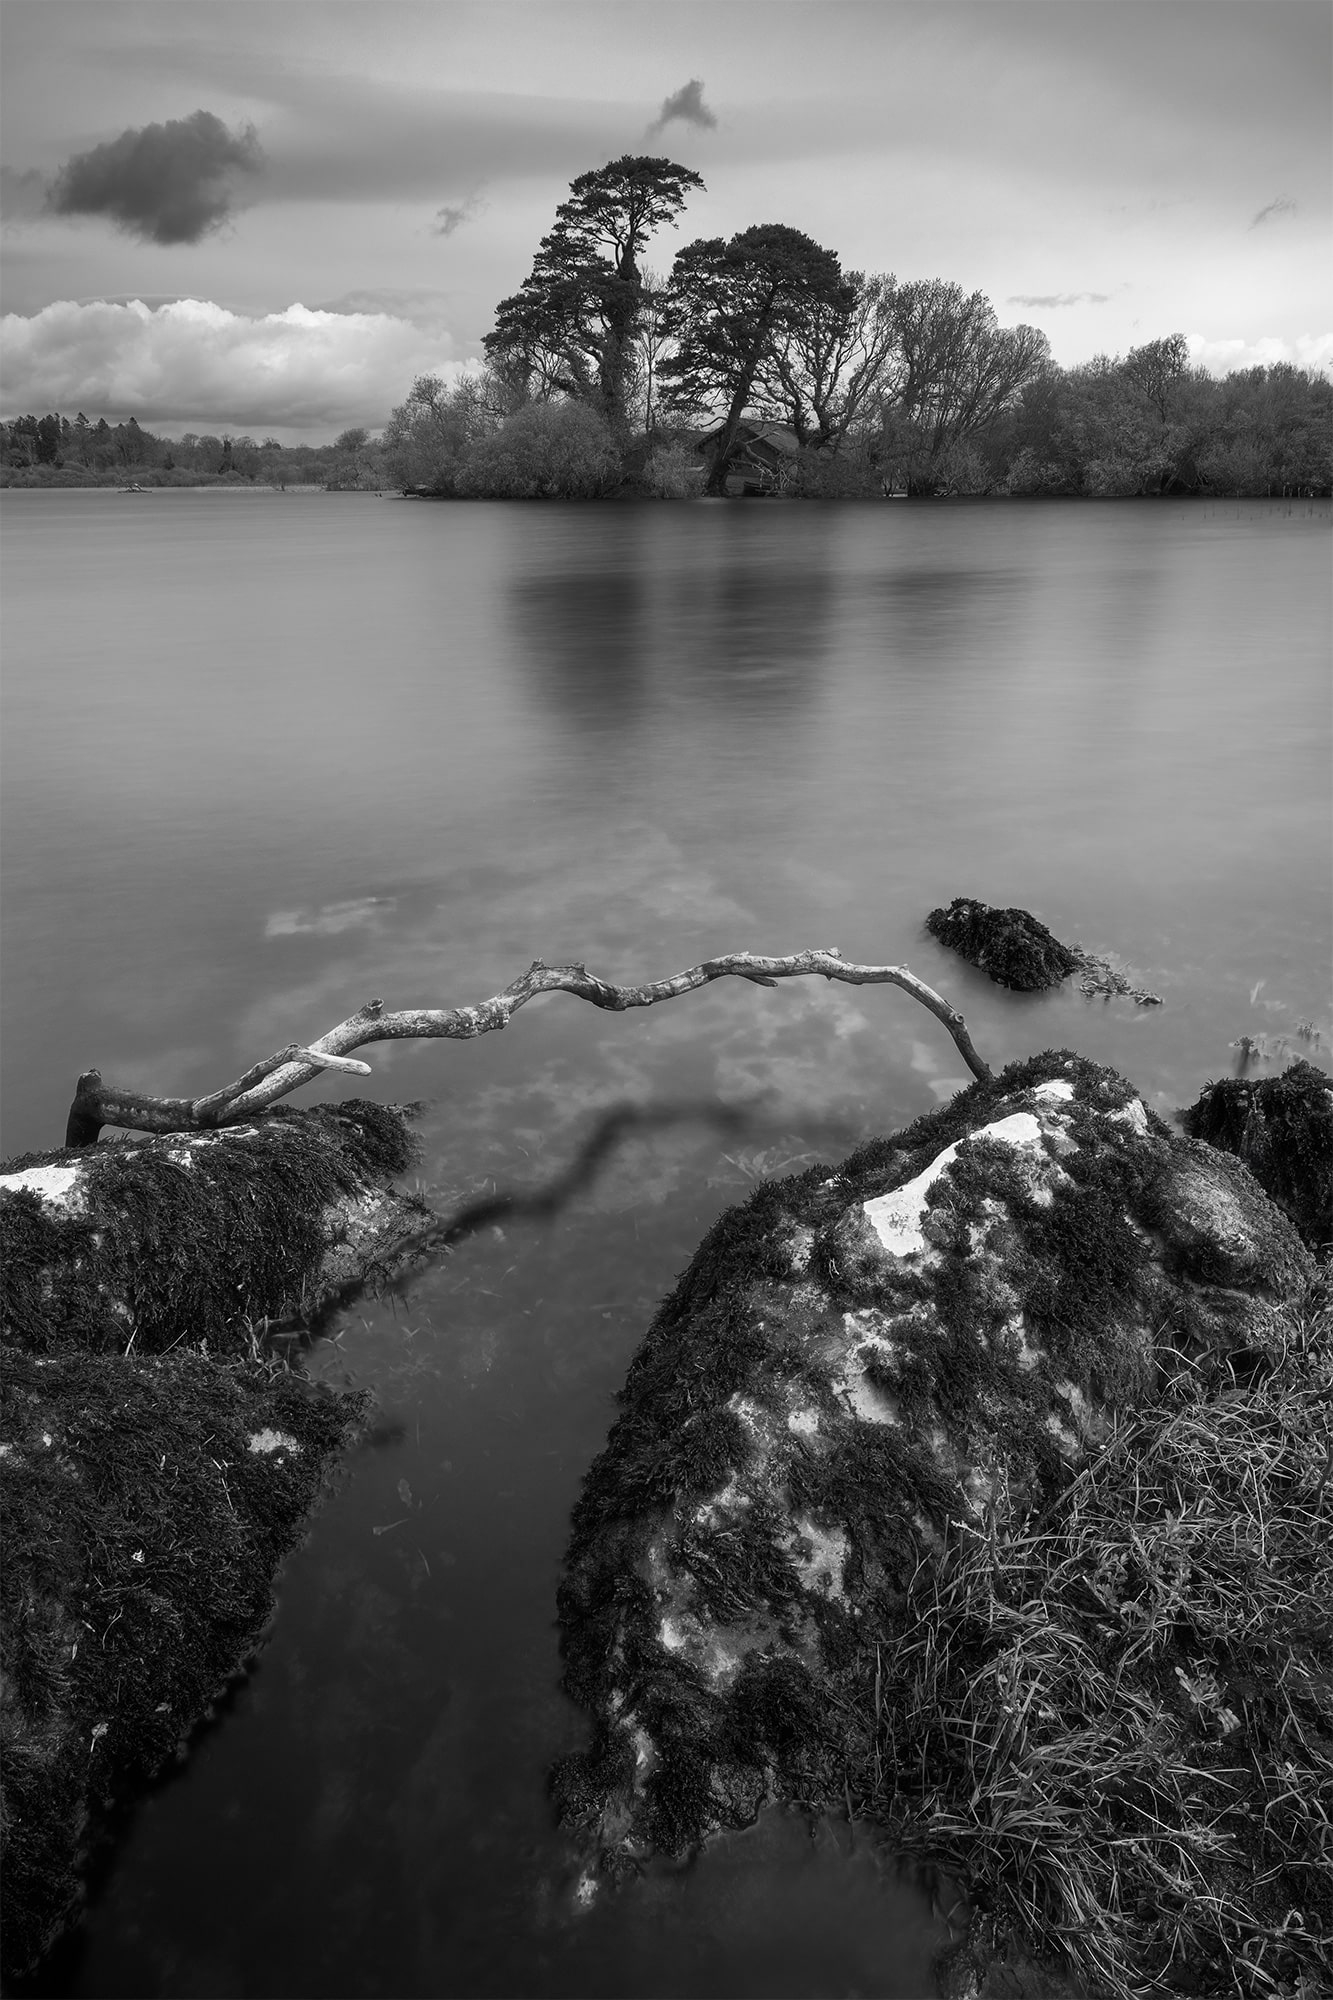 Black and white landscape photograph of the serene lakes of Killarney in Ireland. Captured with a long exposure technique using a Nikon Z8 camera, this stunning image showcases the timeless beauty of the Irish landscape.